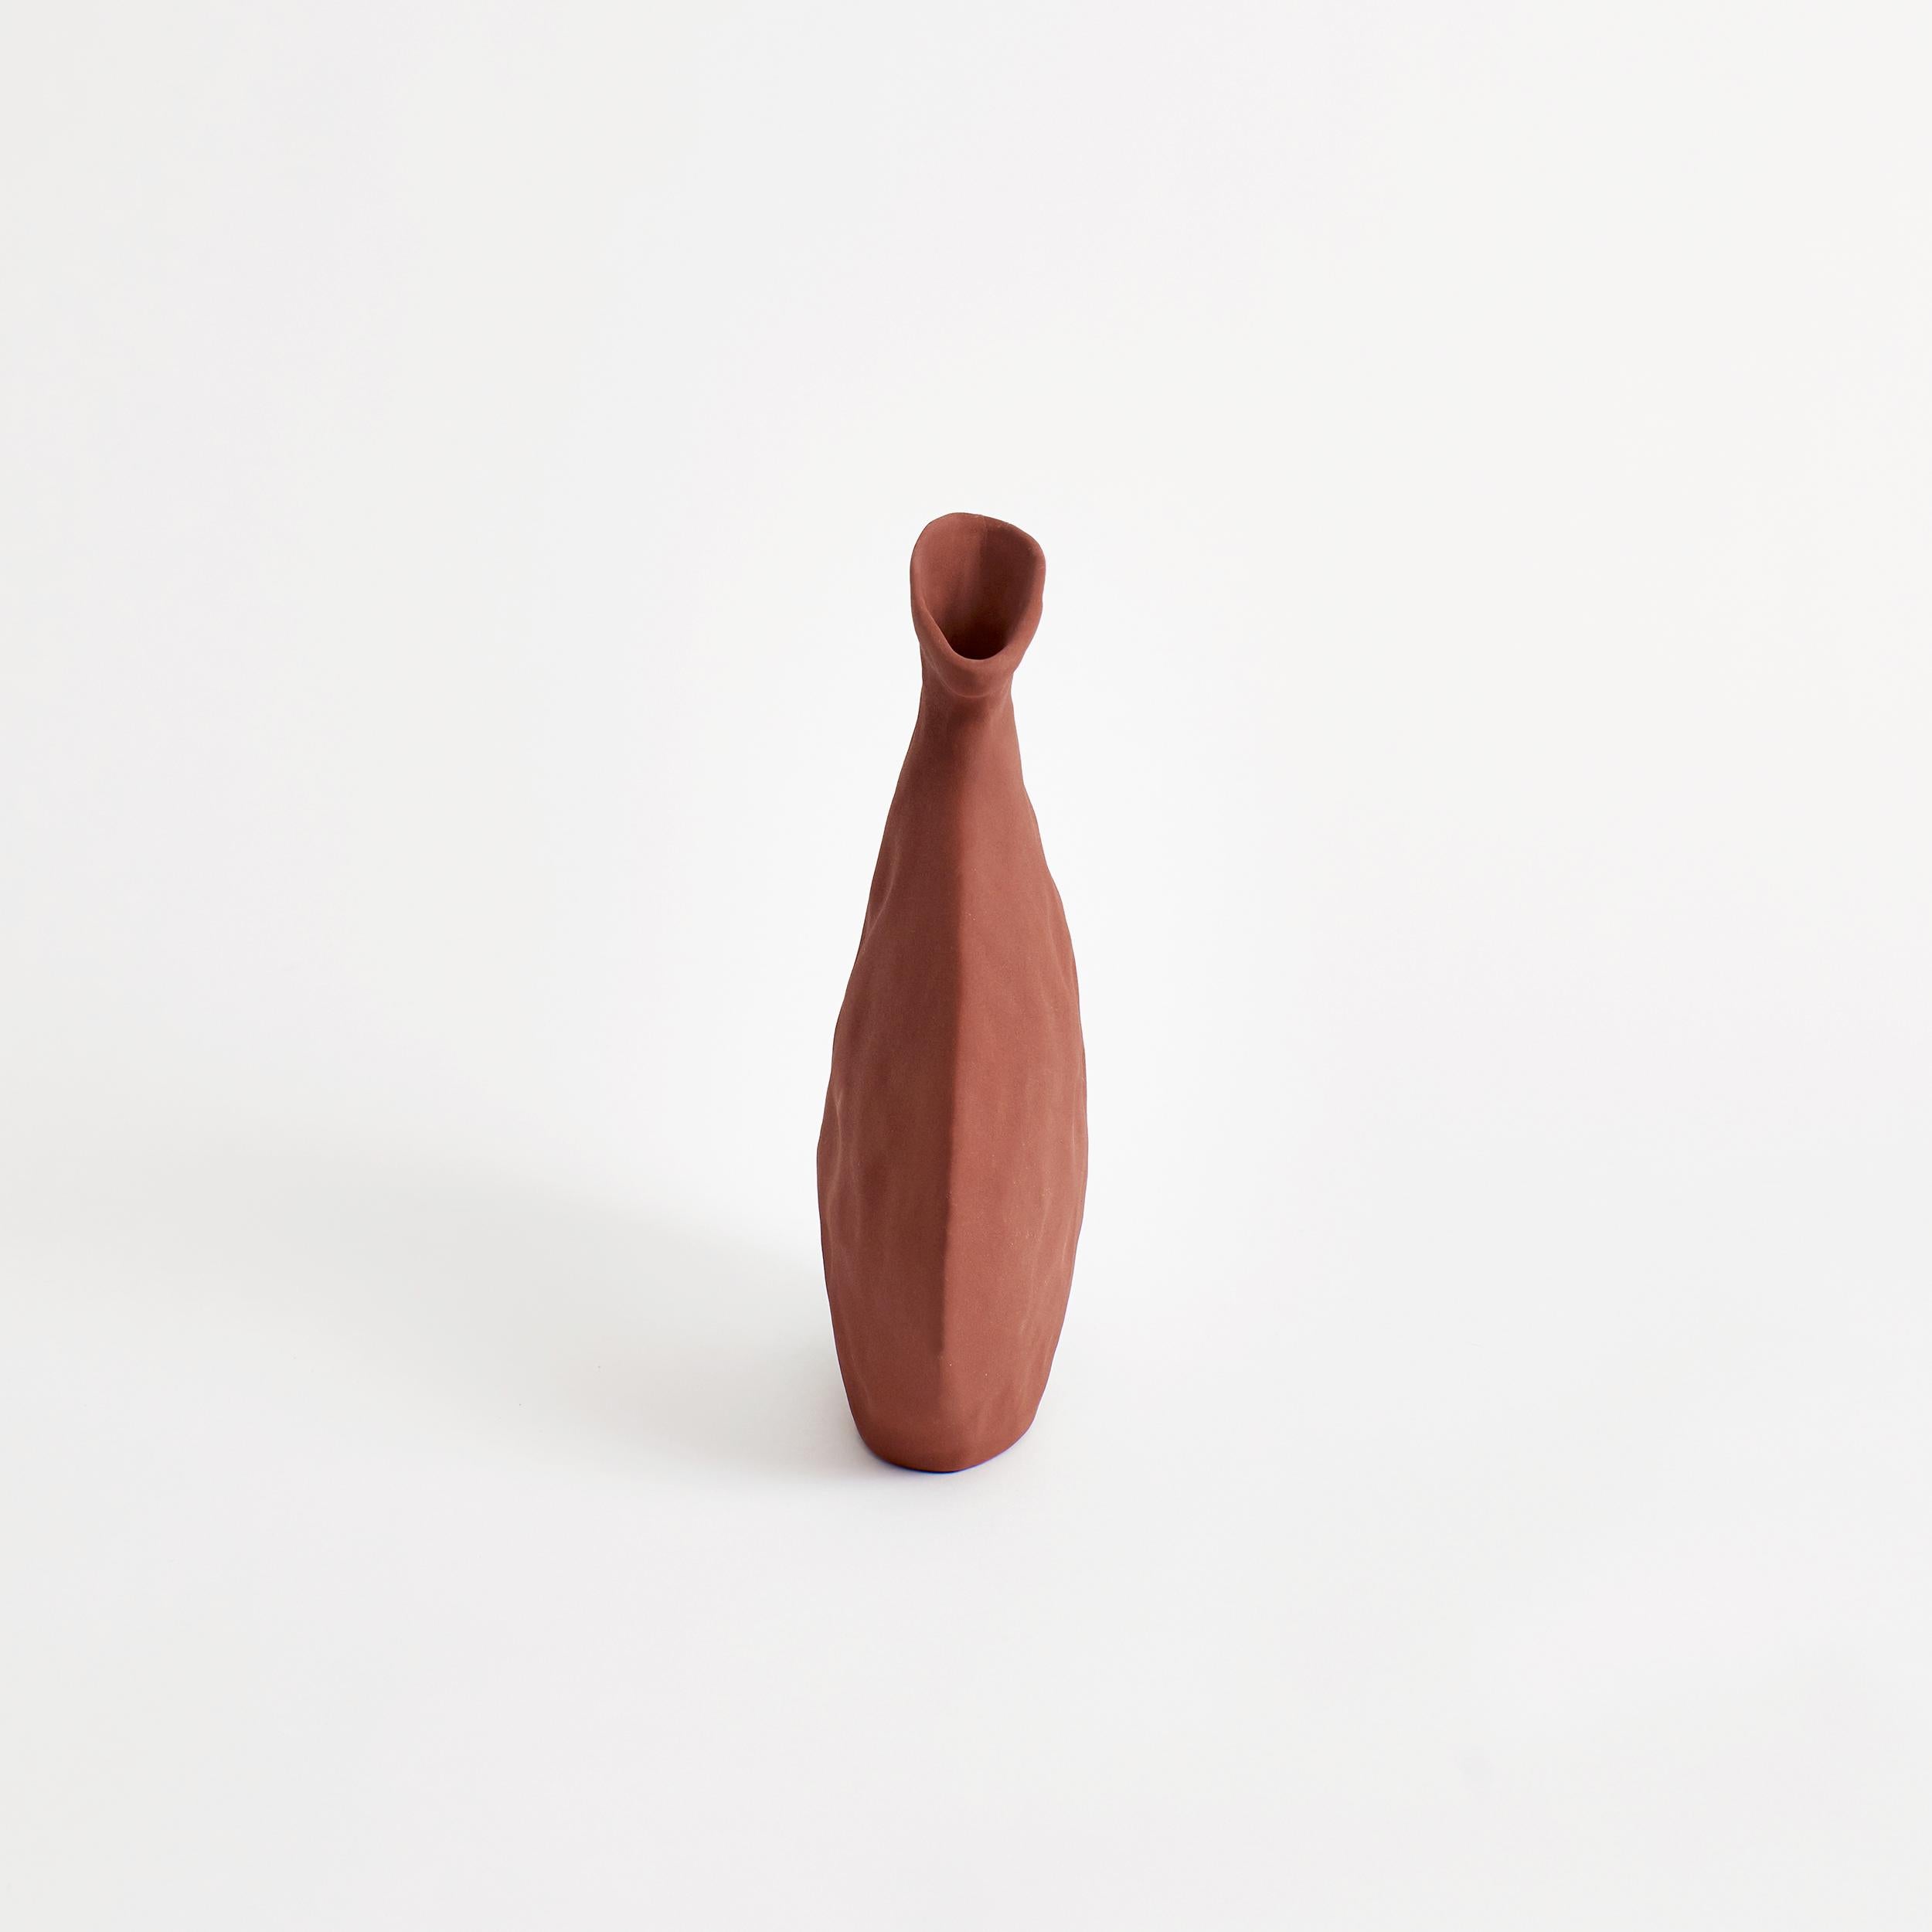 Flat vase in Brick.
Designed by Project 213A in 2021.
Handmade Stoneware.


Creation demands destruction, taking the old and the typical to conceive the new and particular. The Flat Vase represents the essence of this idiosyncrasy through its